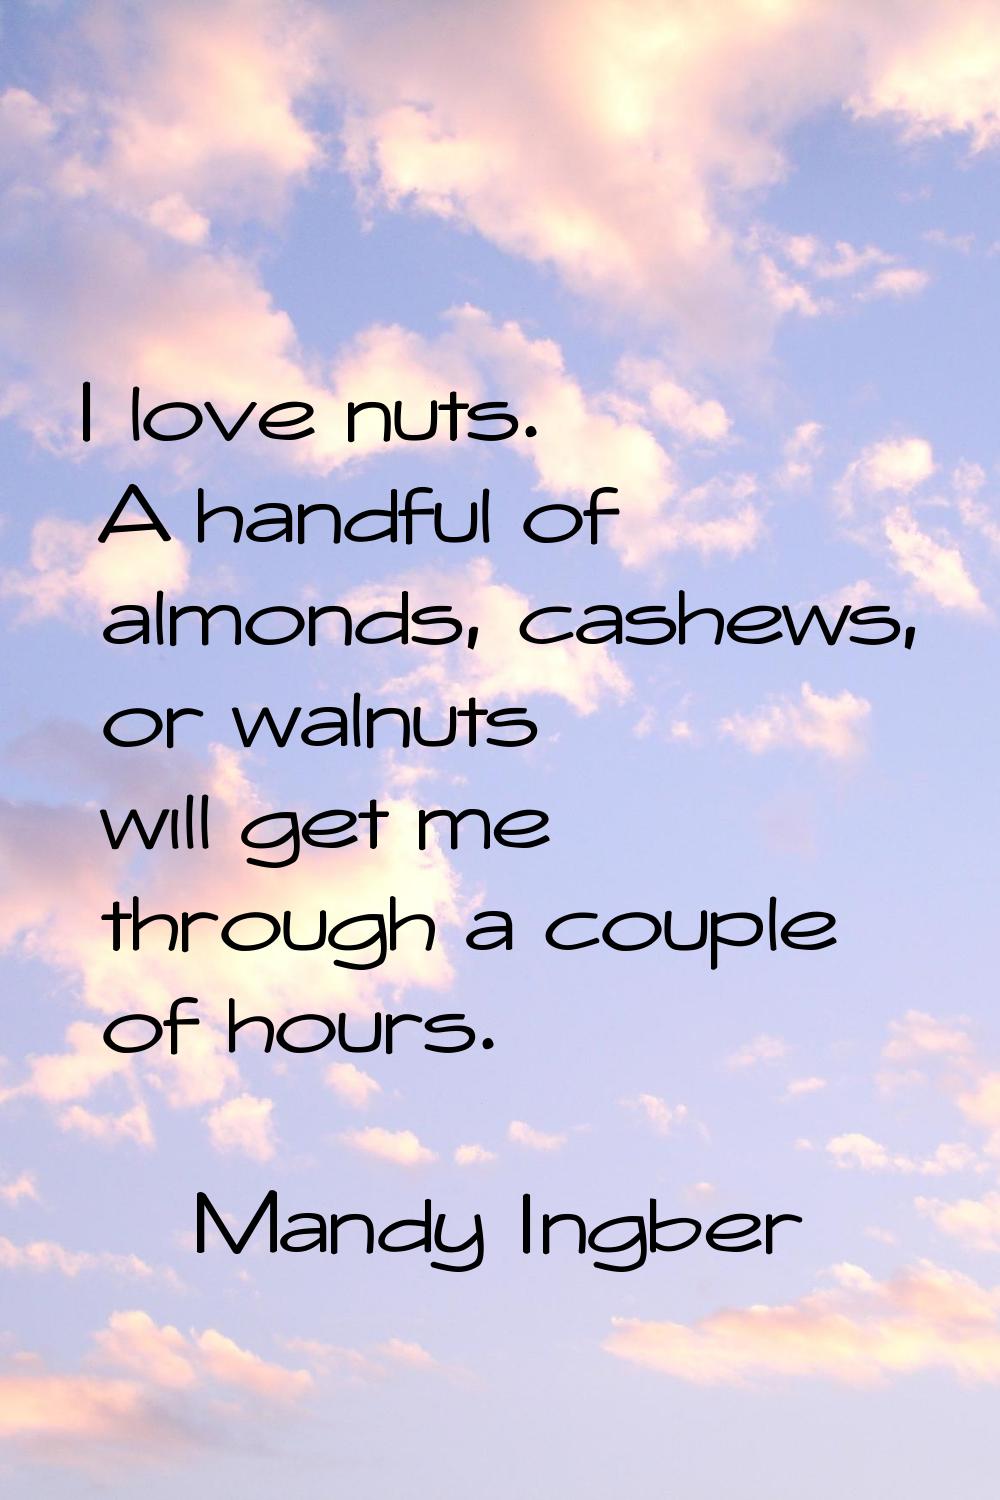 I love nuts. A handful of almonds, cashews, or walnuts will get me through a couple of hours.